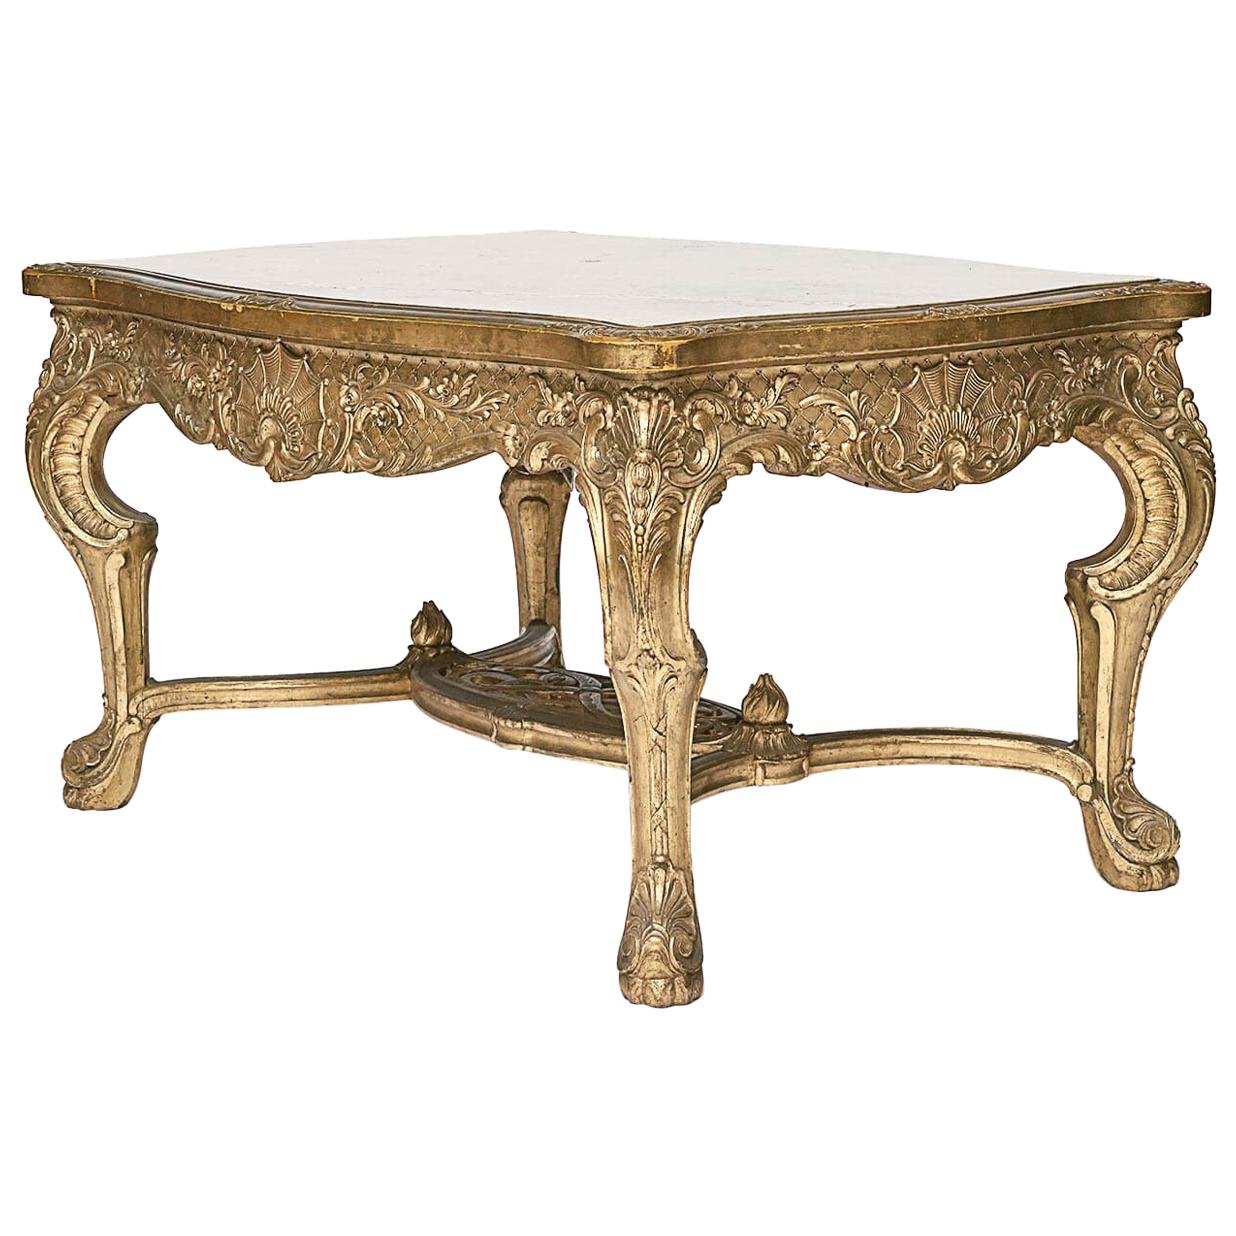 Royal Lounge Table from Fredensborg Palace